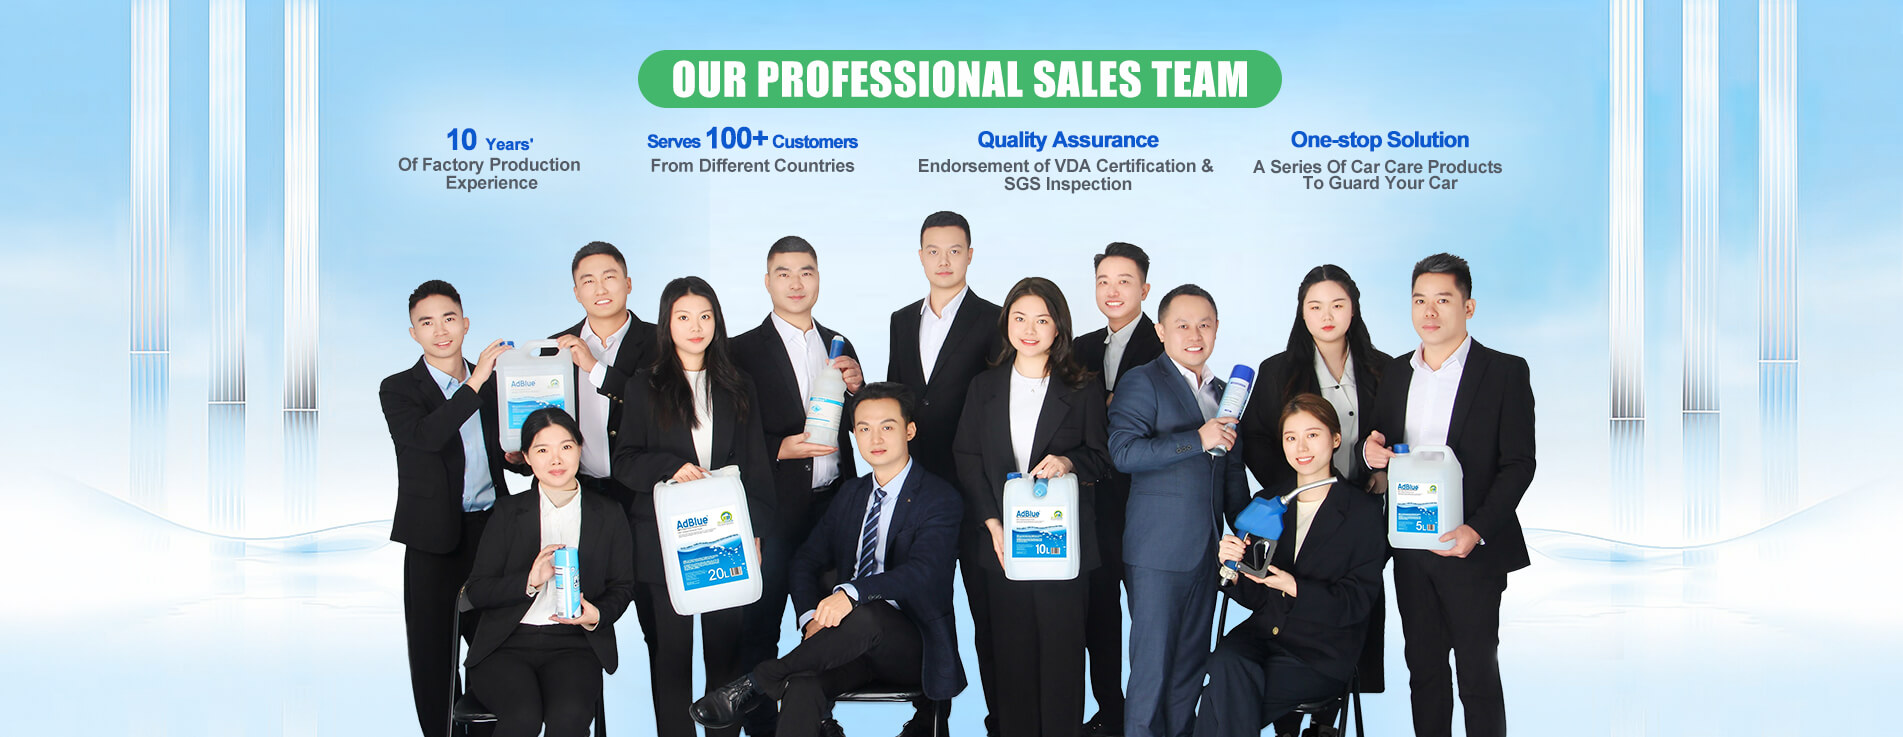 Our Professional Sales Team